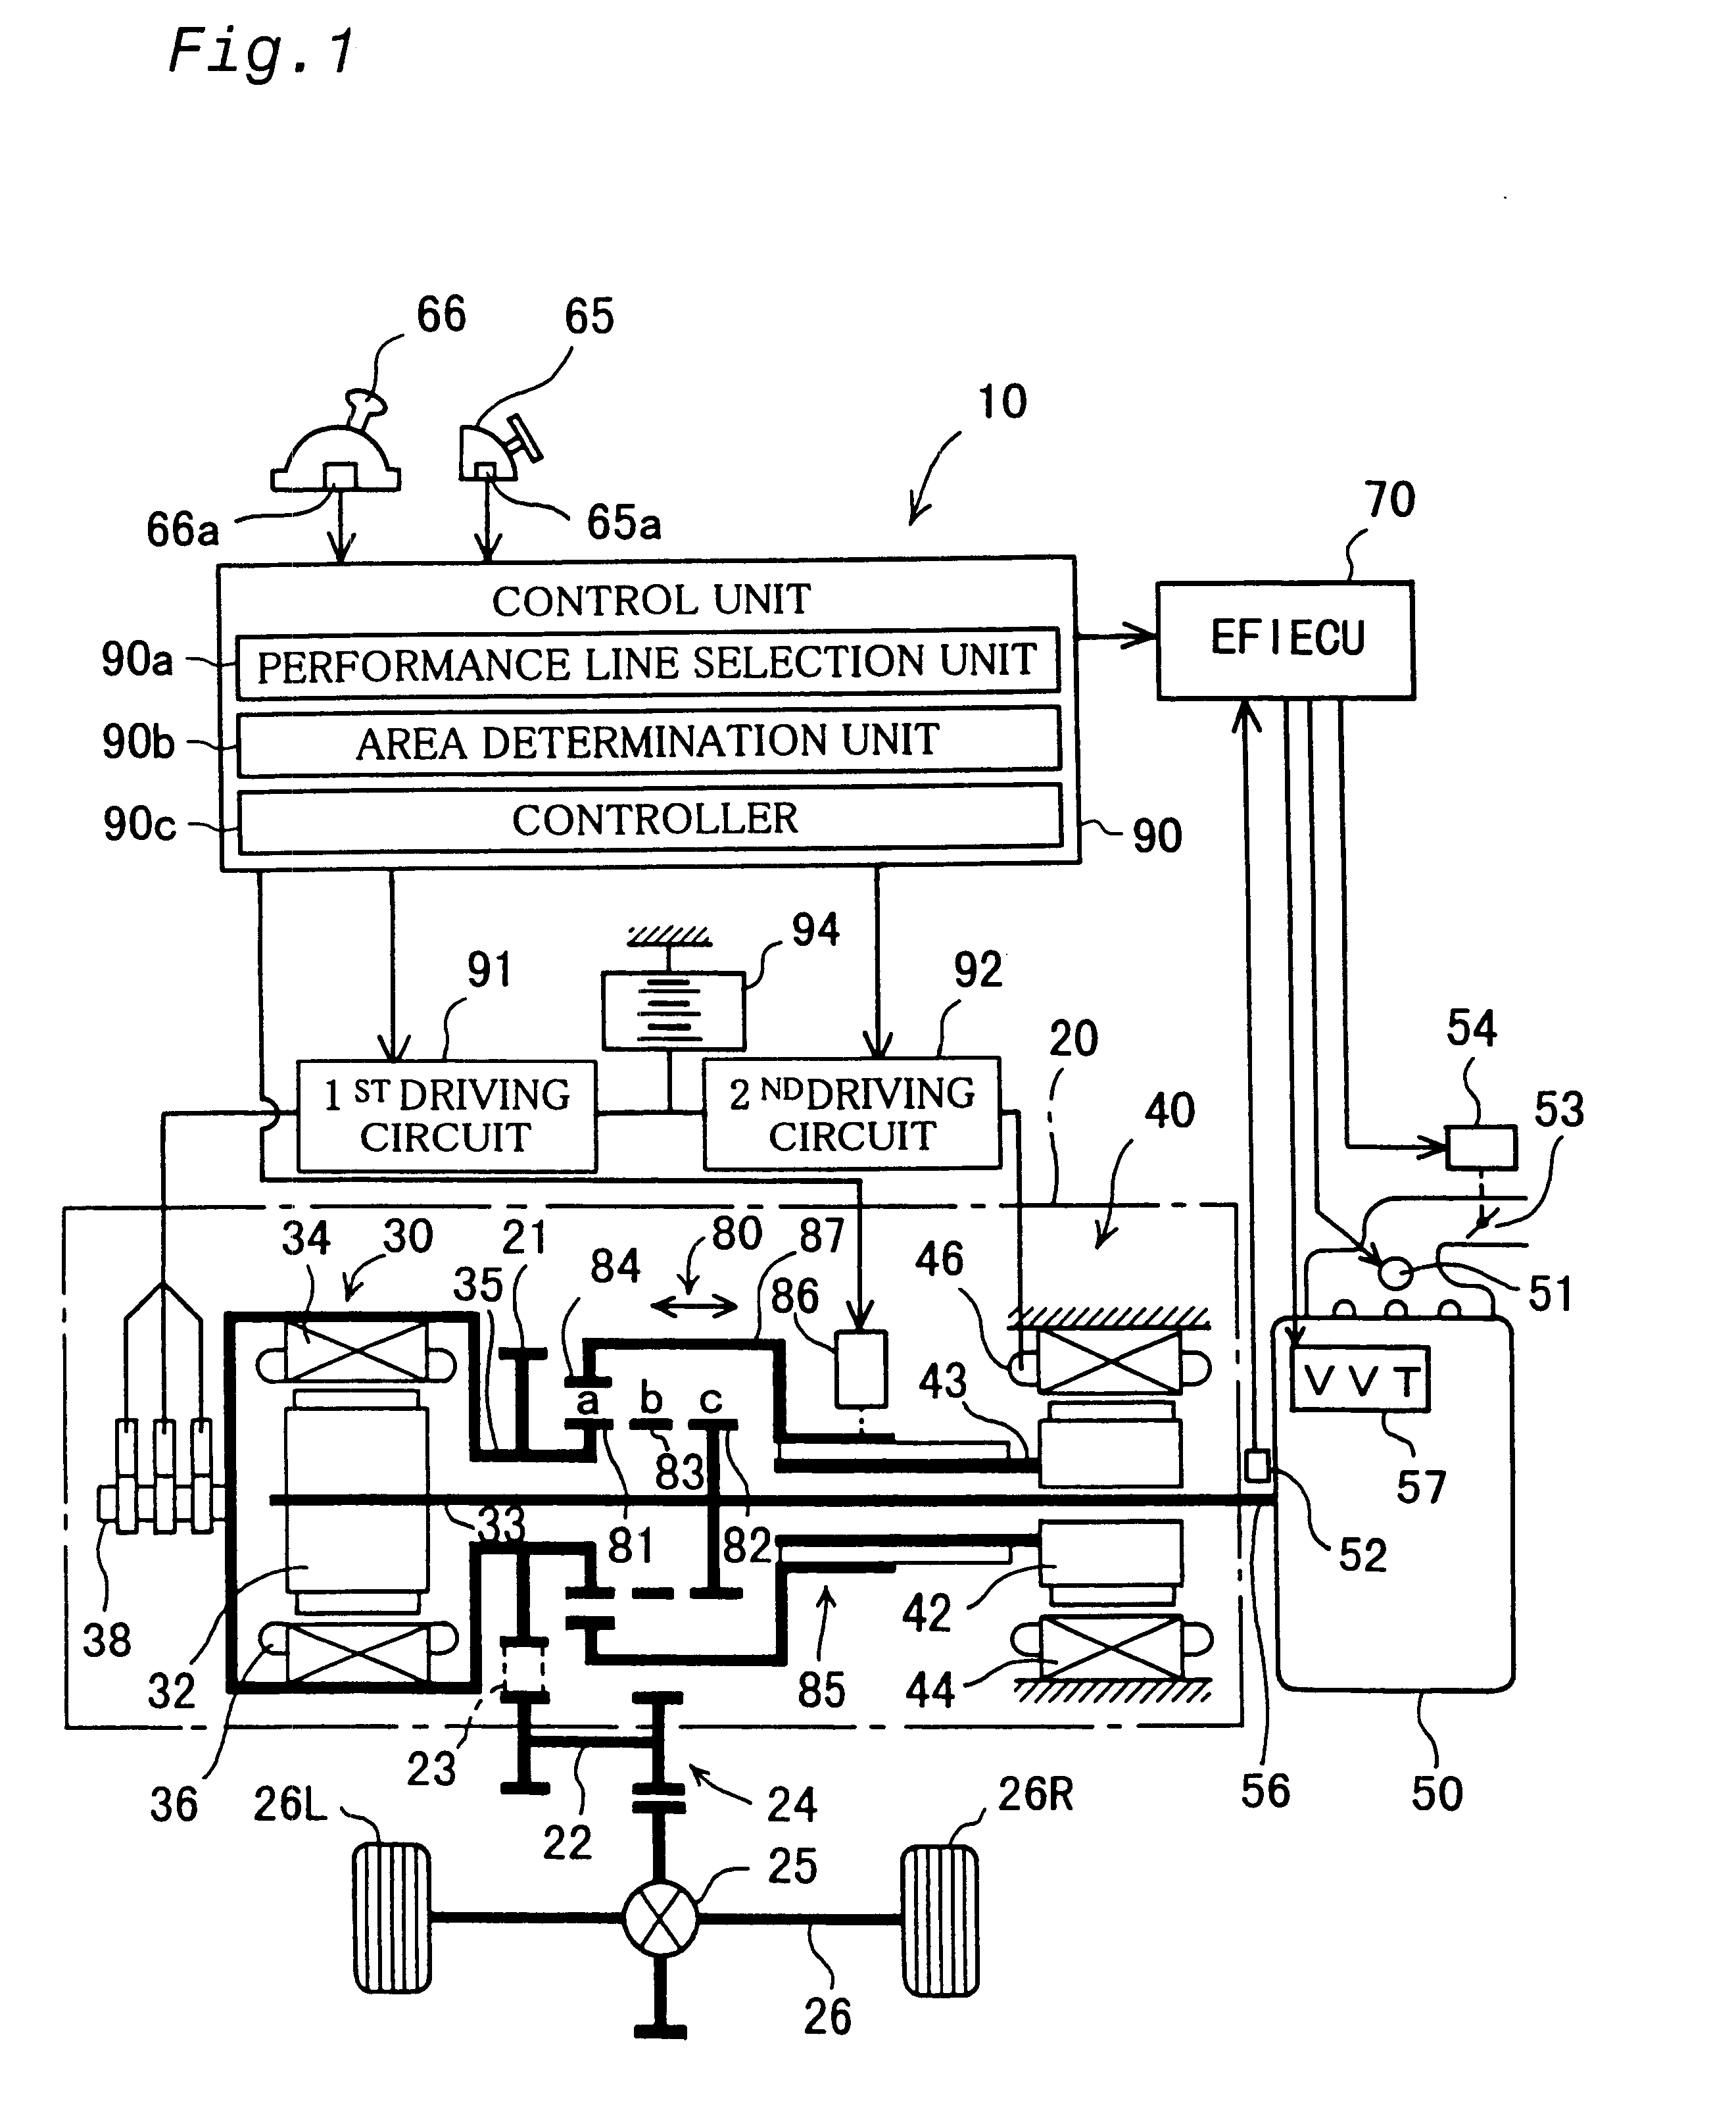 Power output apparatus and method of controlling the same